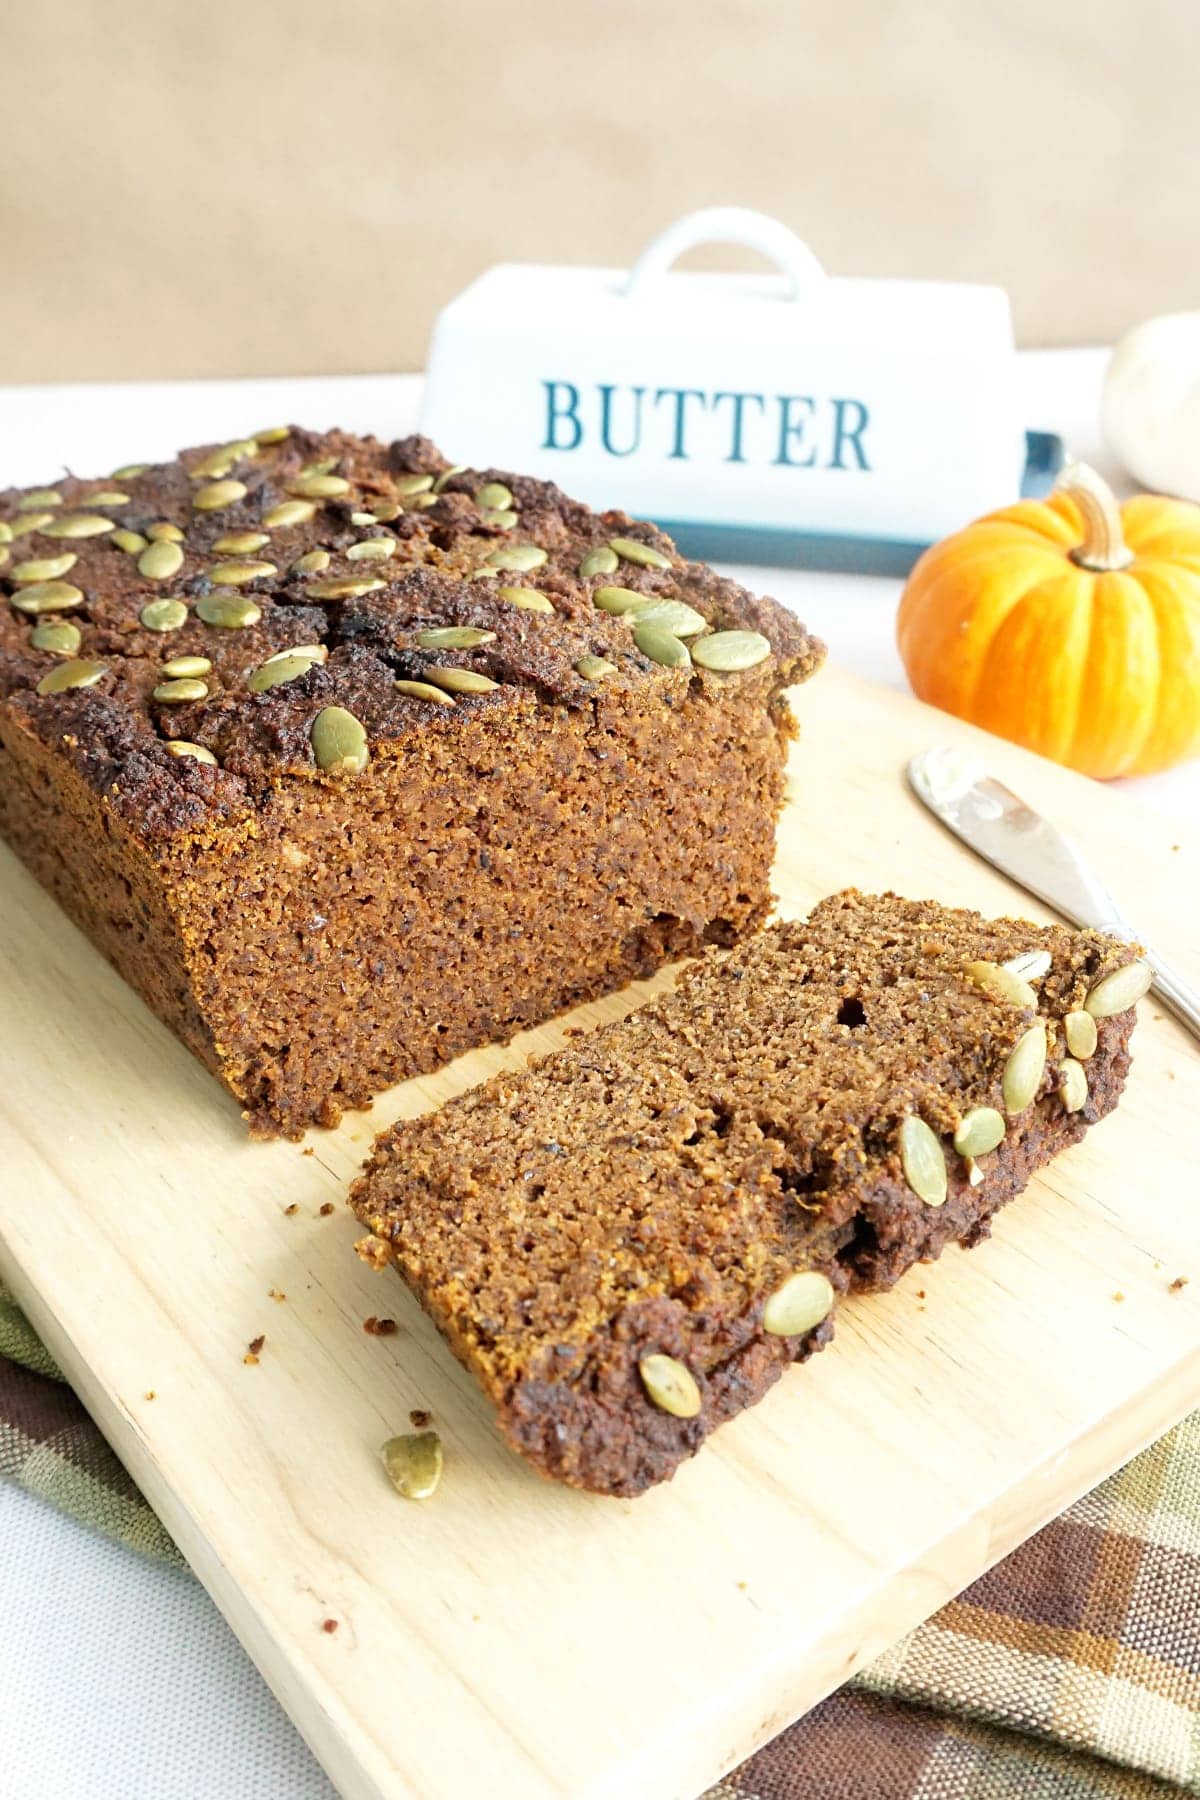 Slices of Hearty Keto Pumpkin Bread with Pecan & Flax next to the loaf